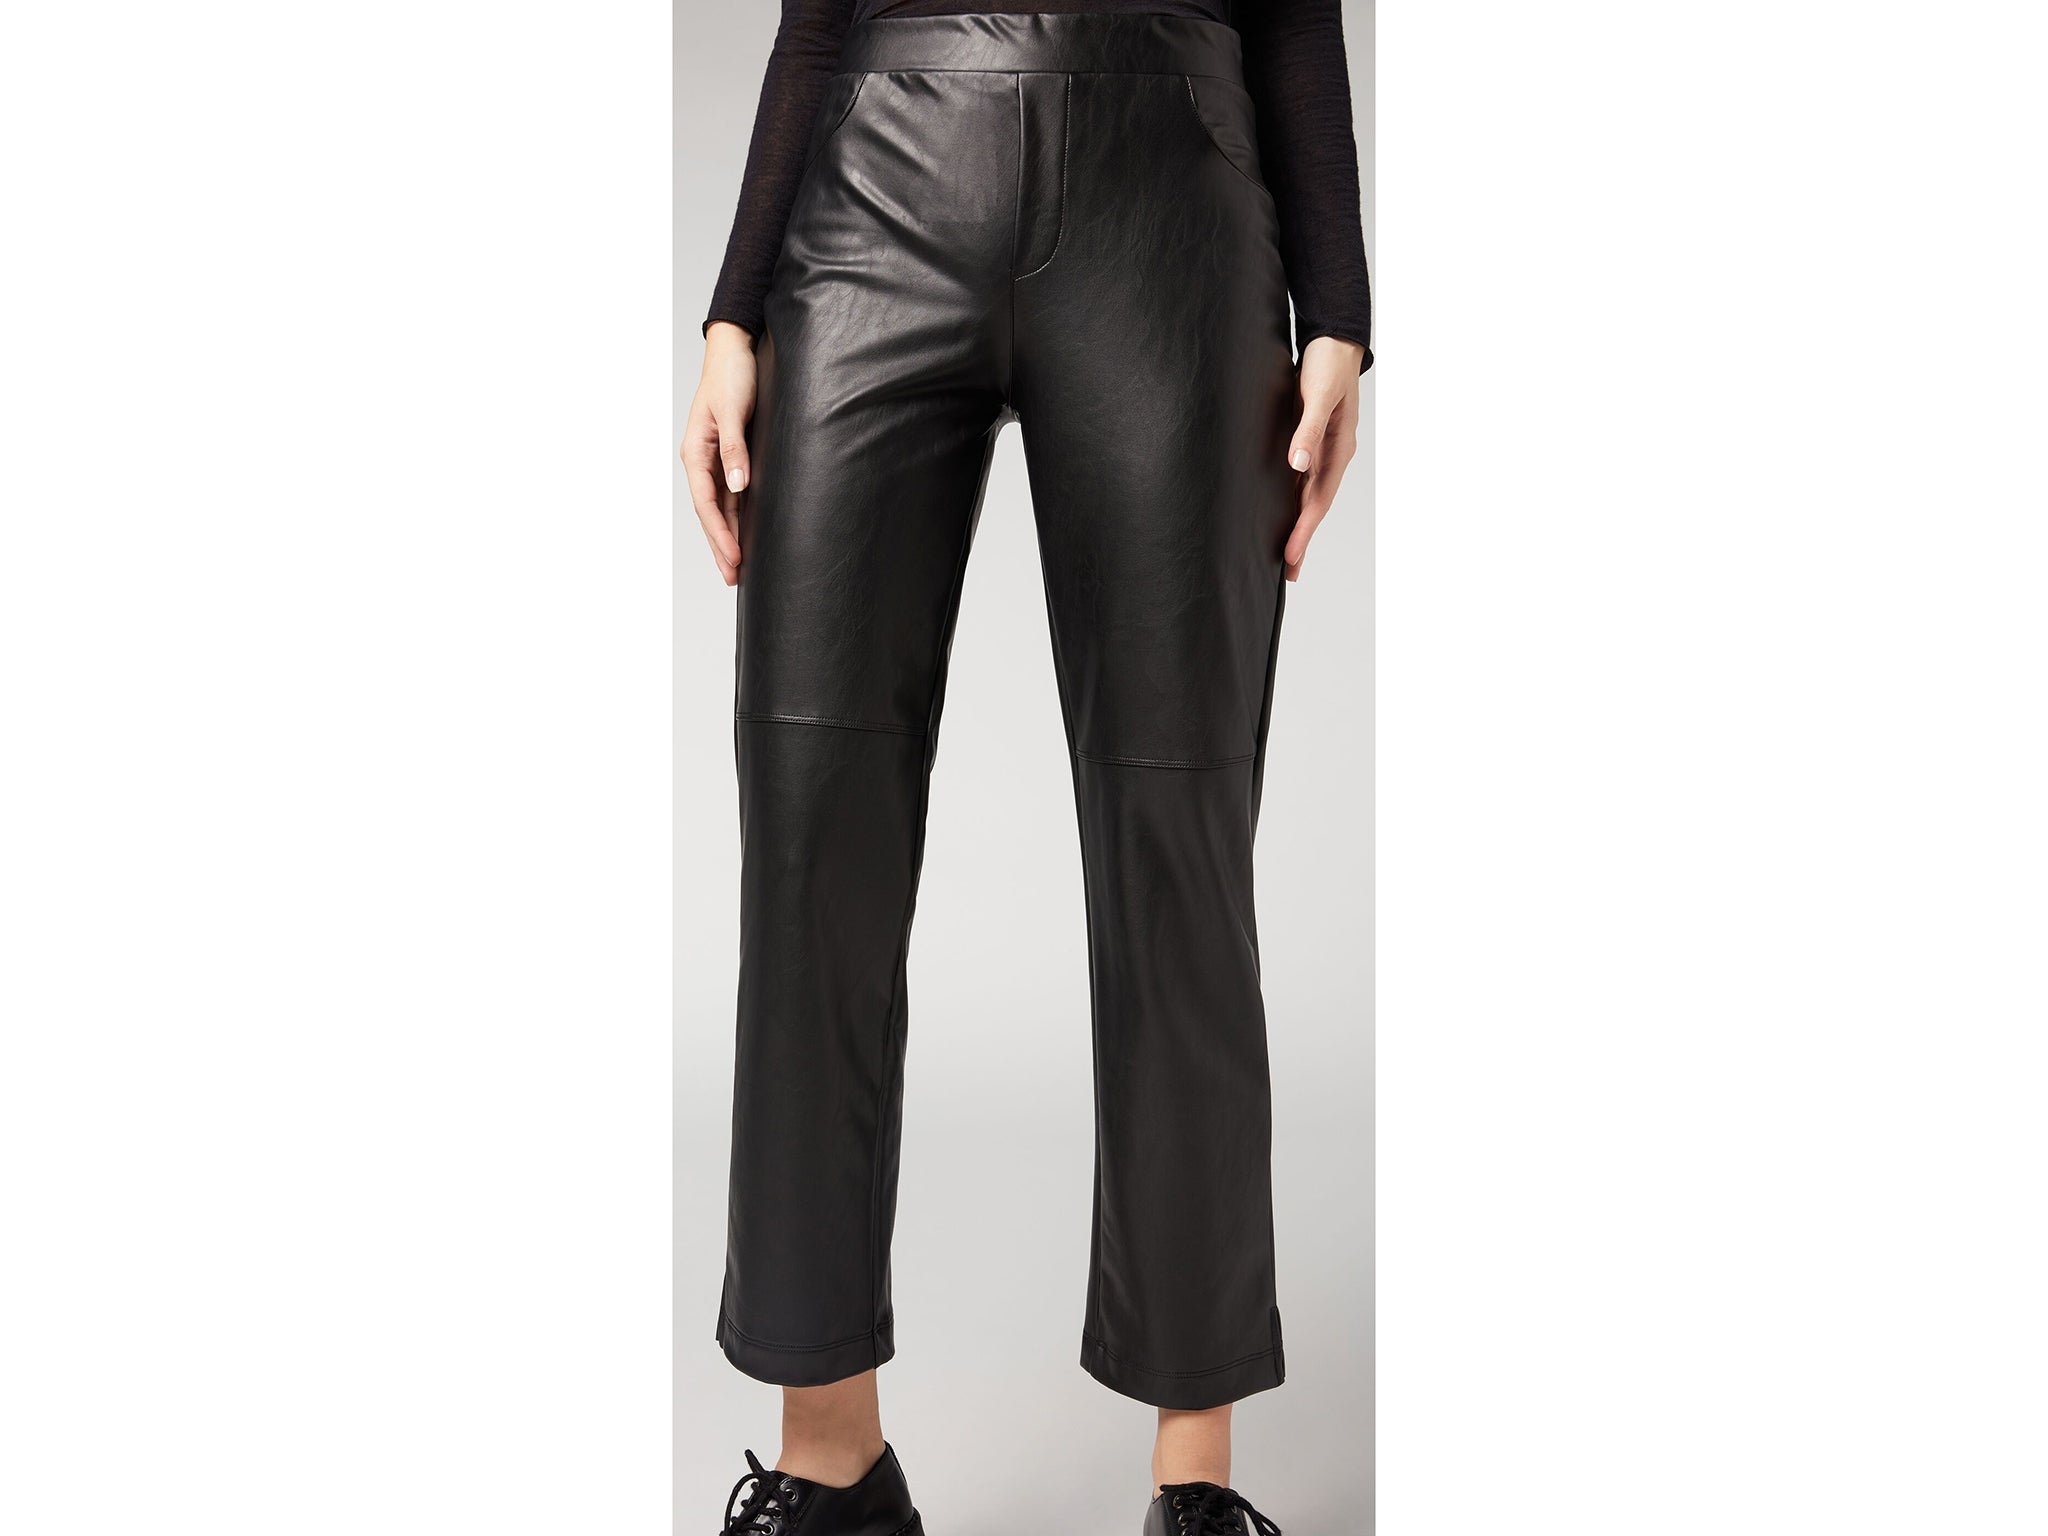 calzedonia-thermal-leather-effect-leggings-fleece-lined-indybest.jpg